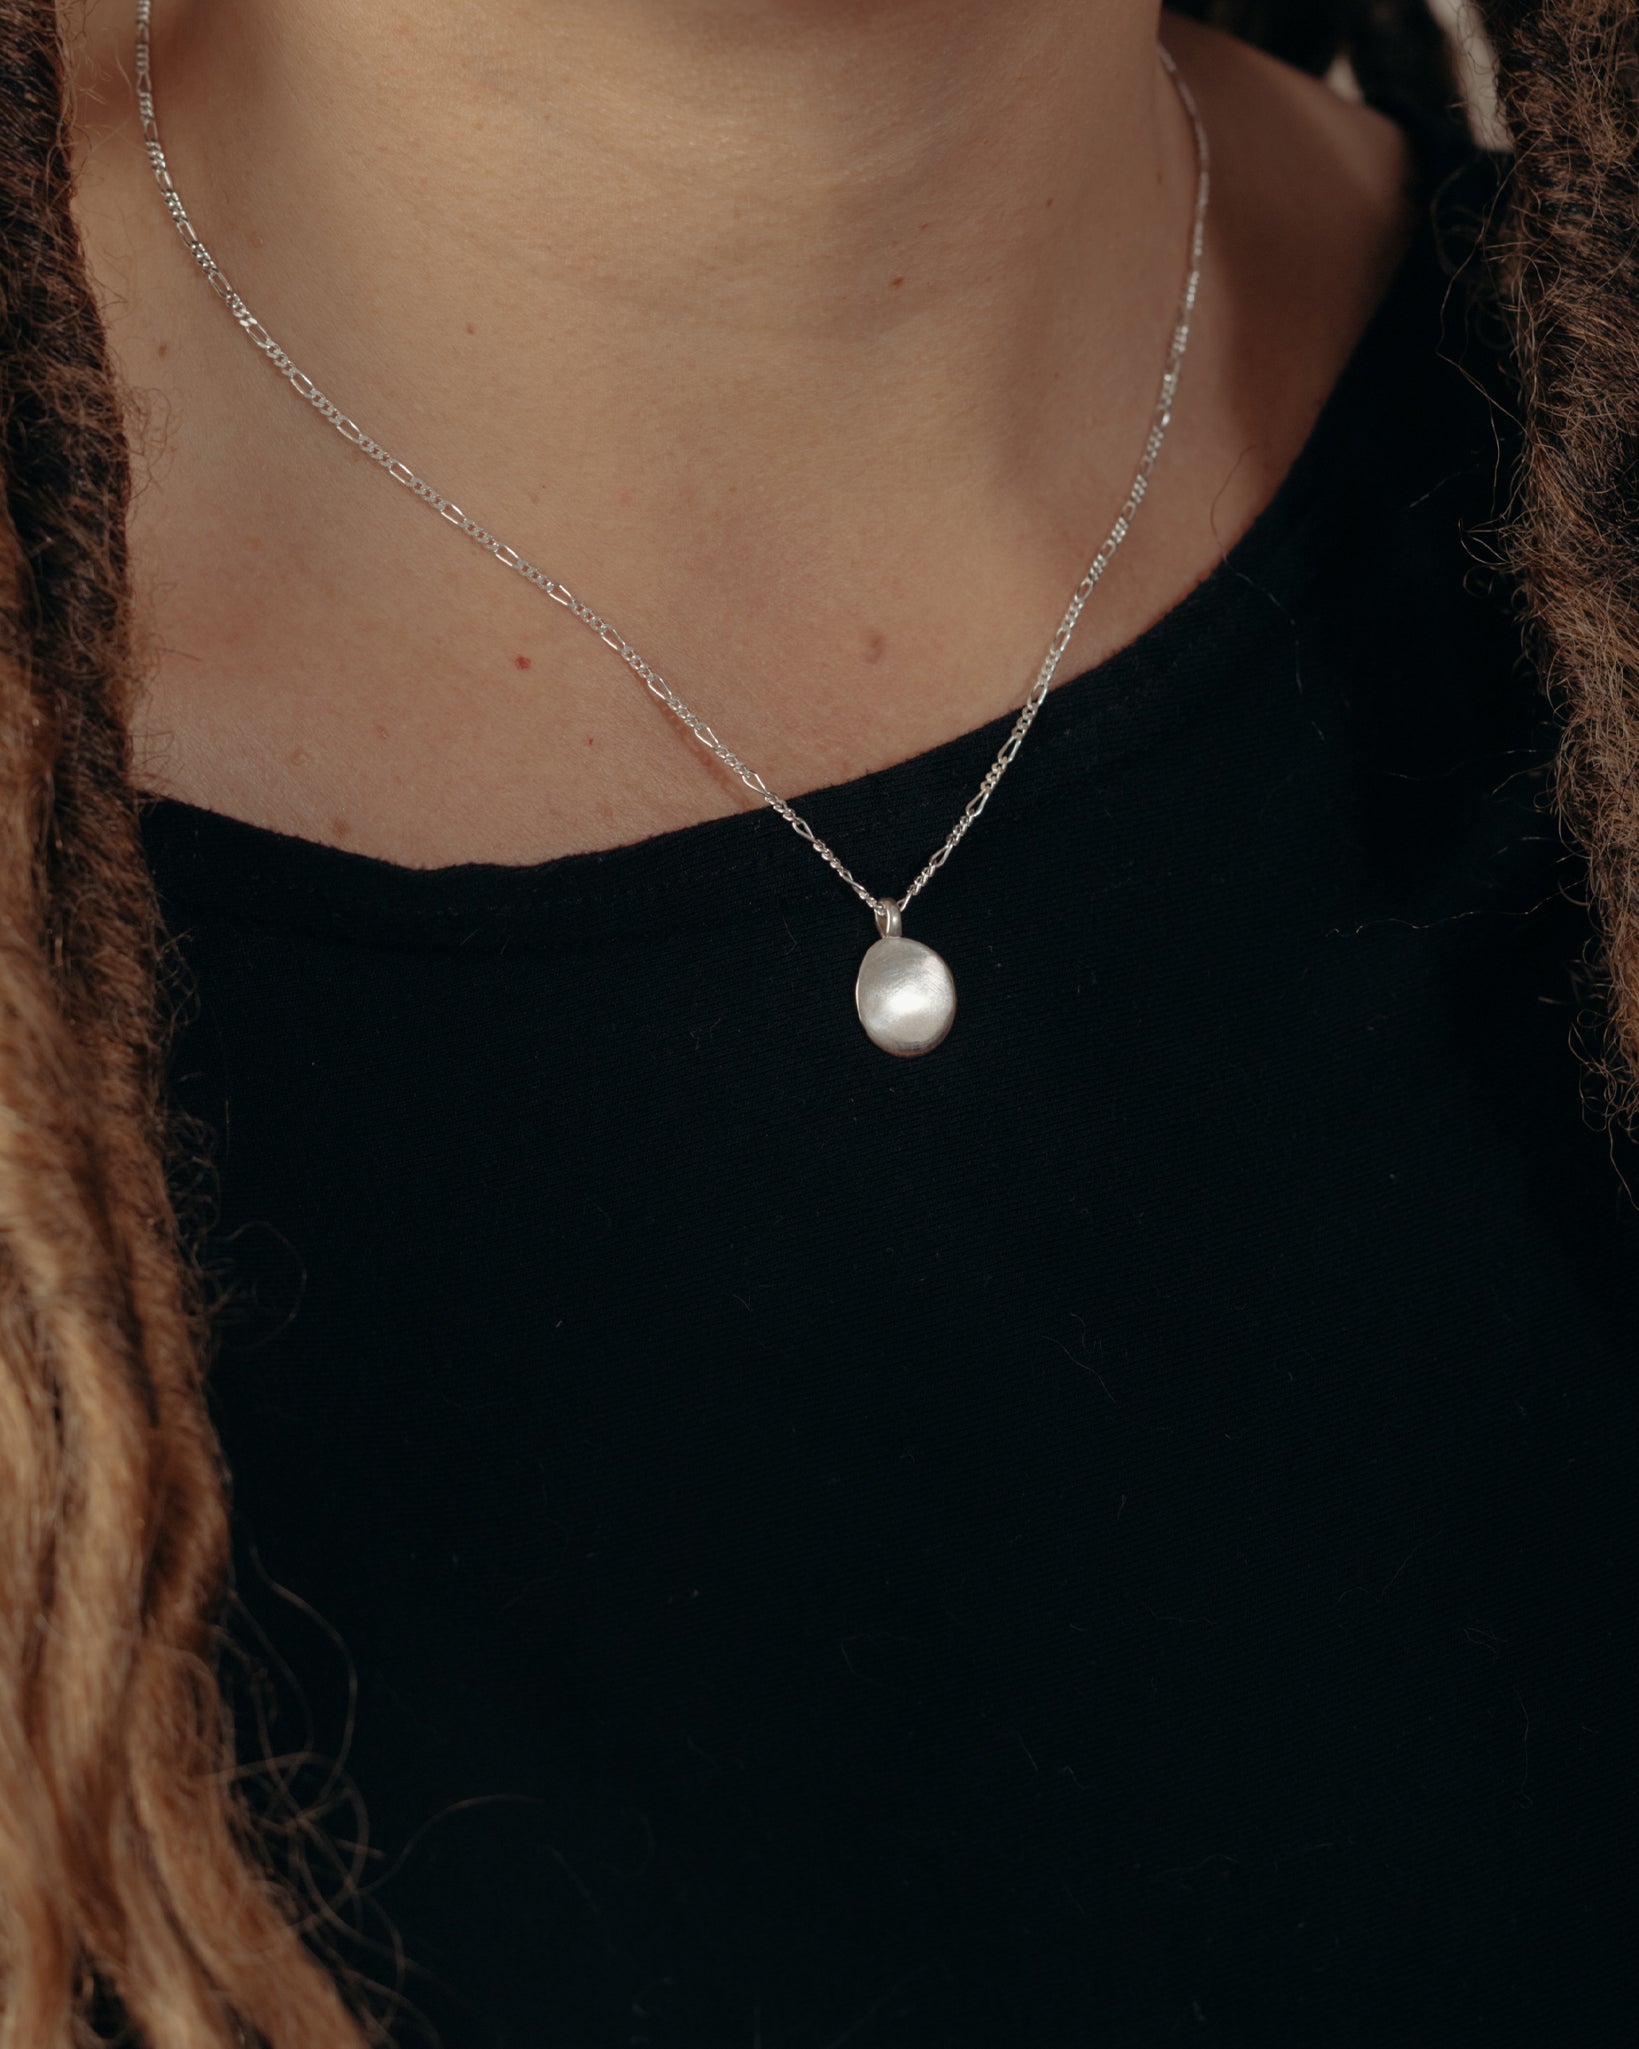 Silver oval pendant necklace on model